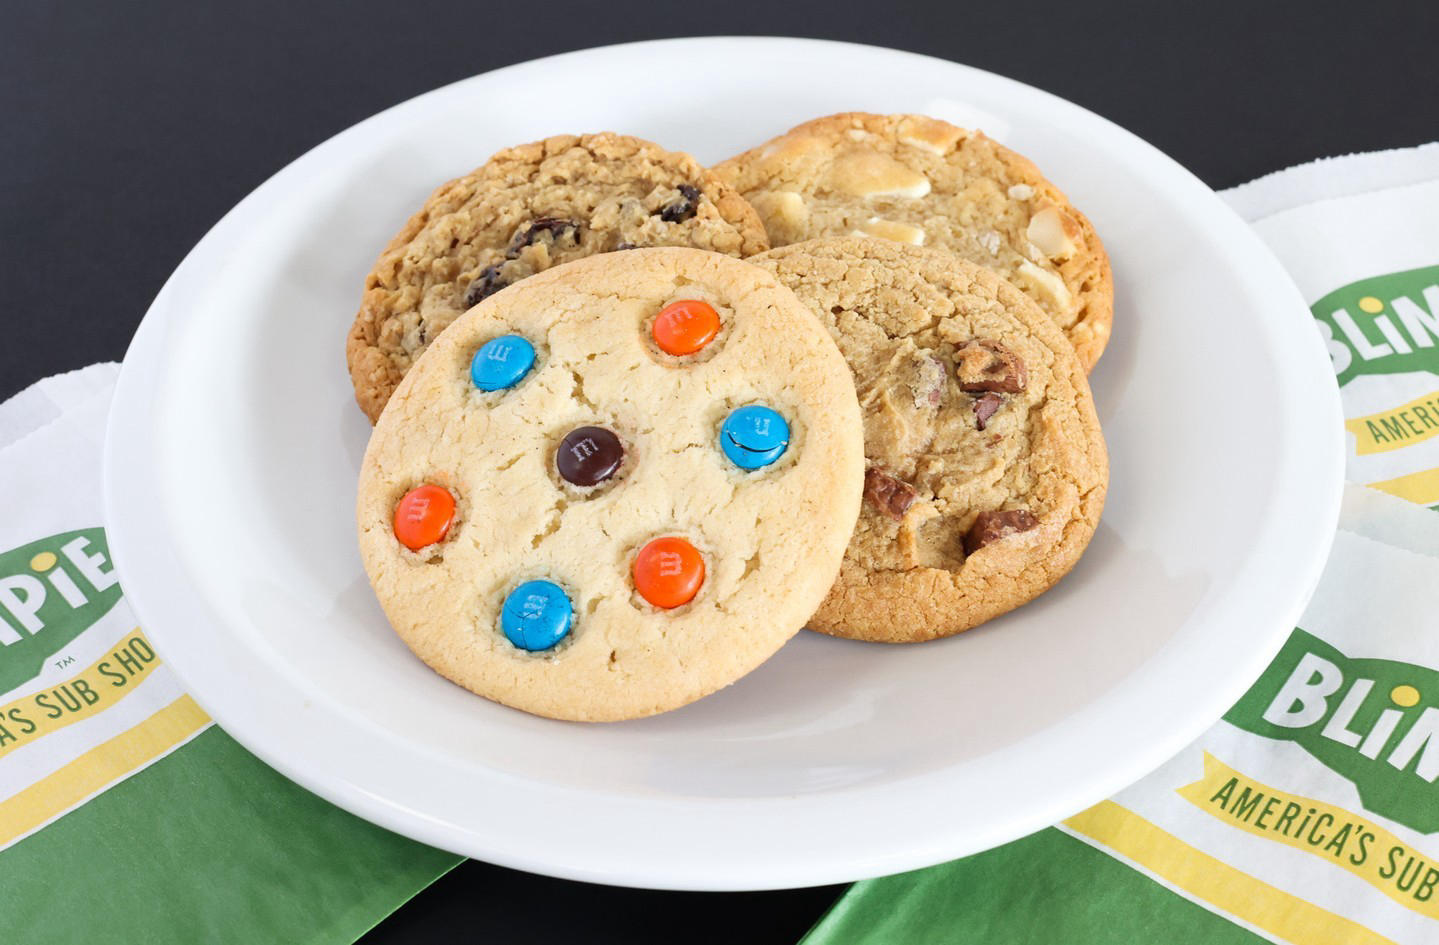 image  1 Blimpie - Pairing our fresh baked cookies with your sub